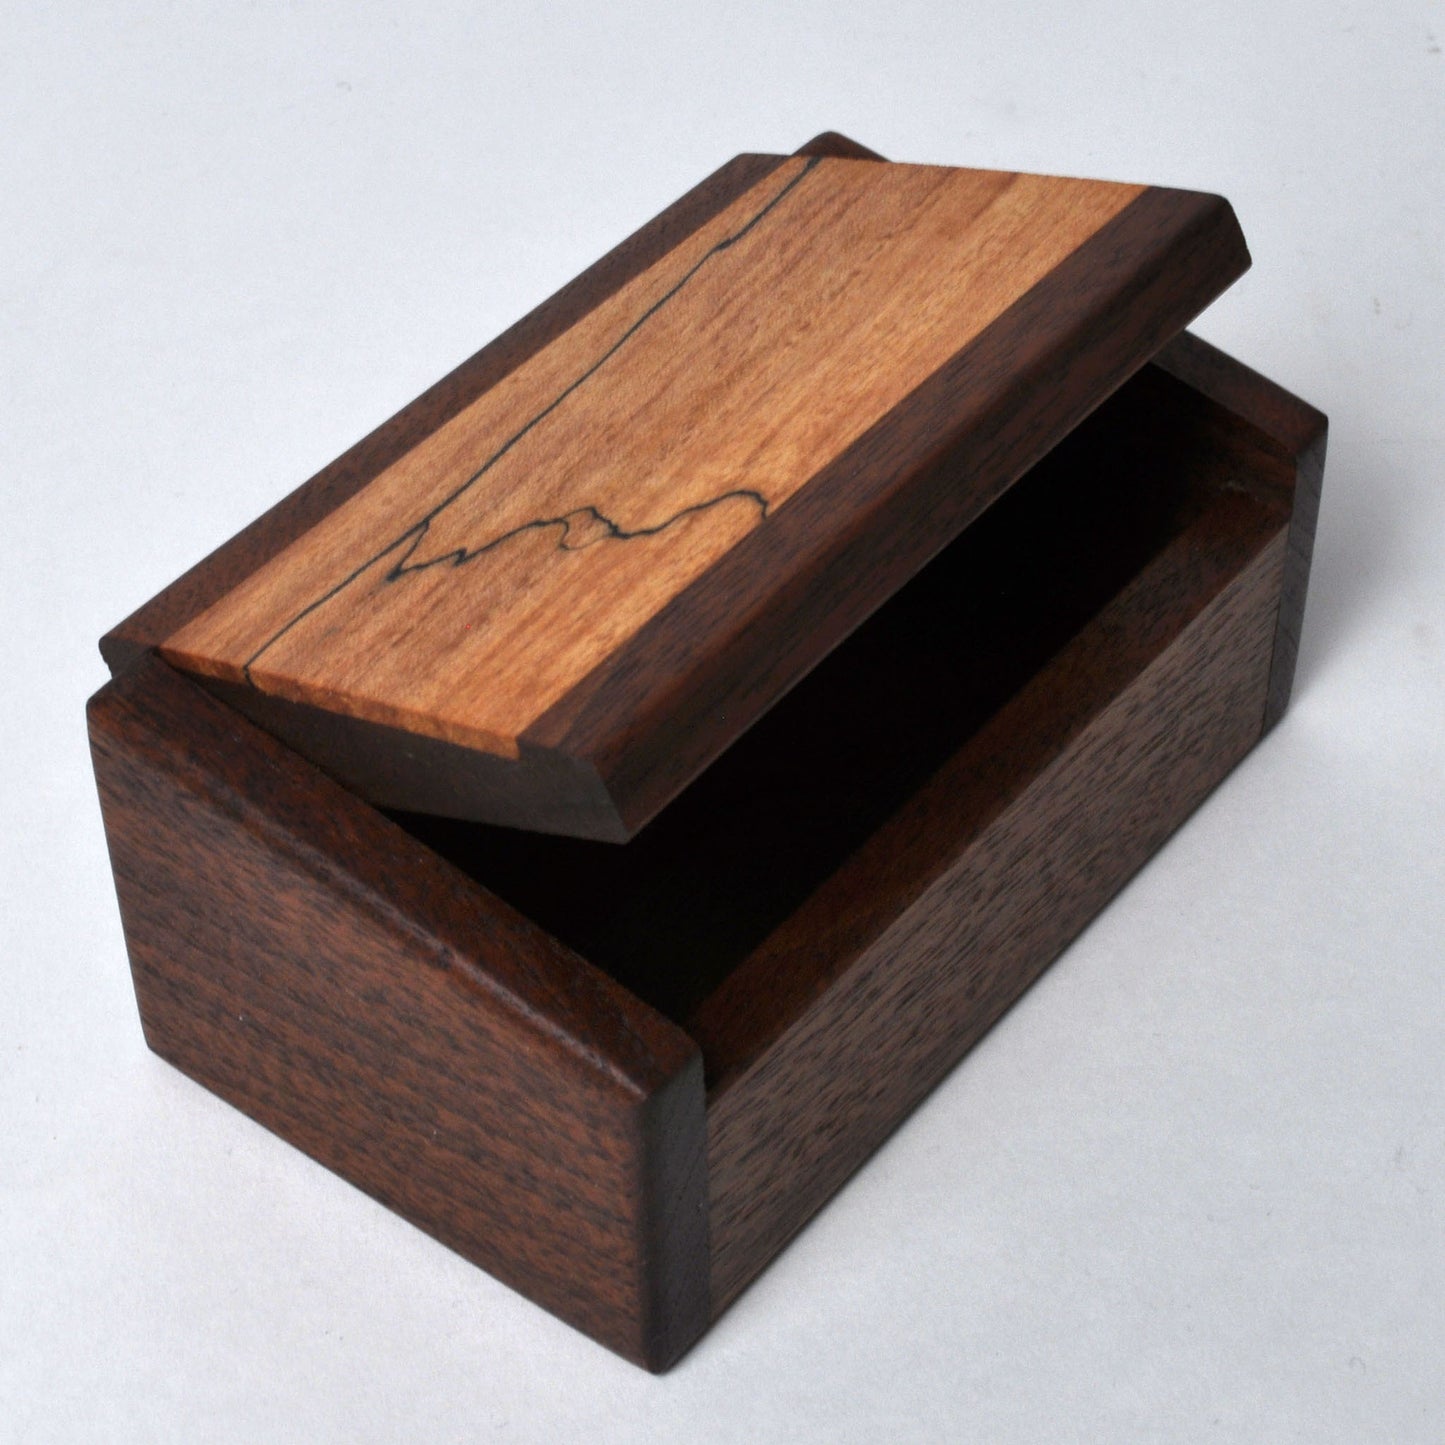 Doug Stowe - Wooden Spalted Box